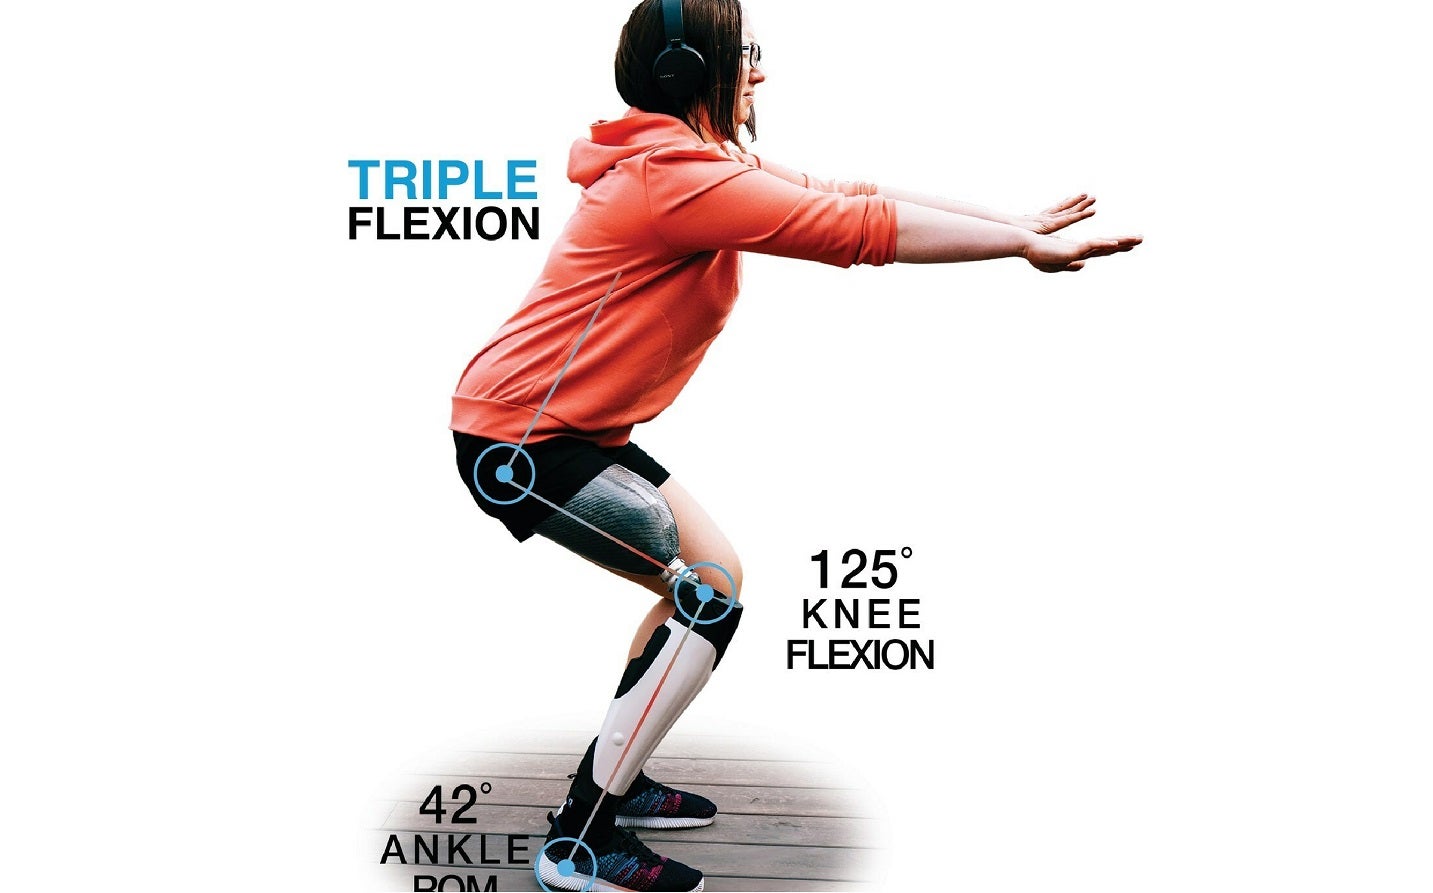 Proteor launches SYNSYS system for triple flexion movements